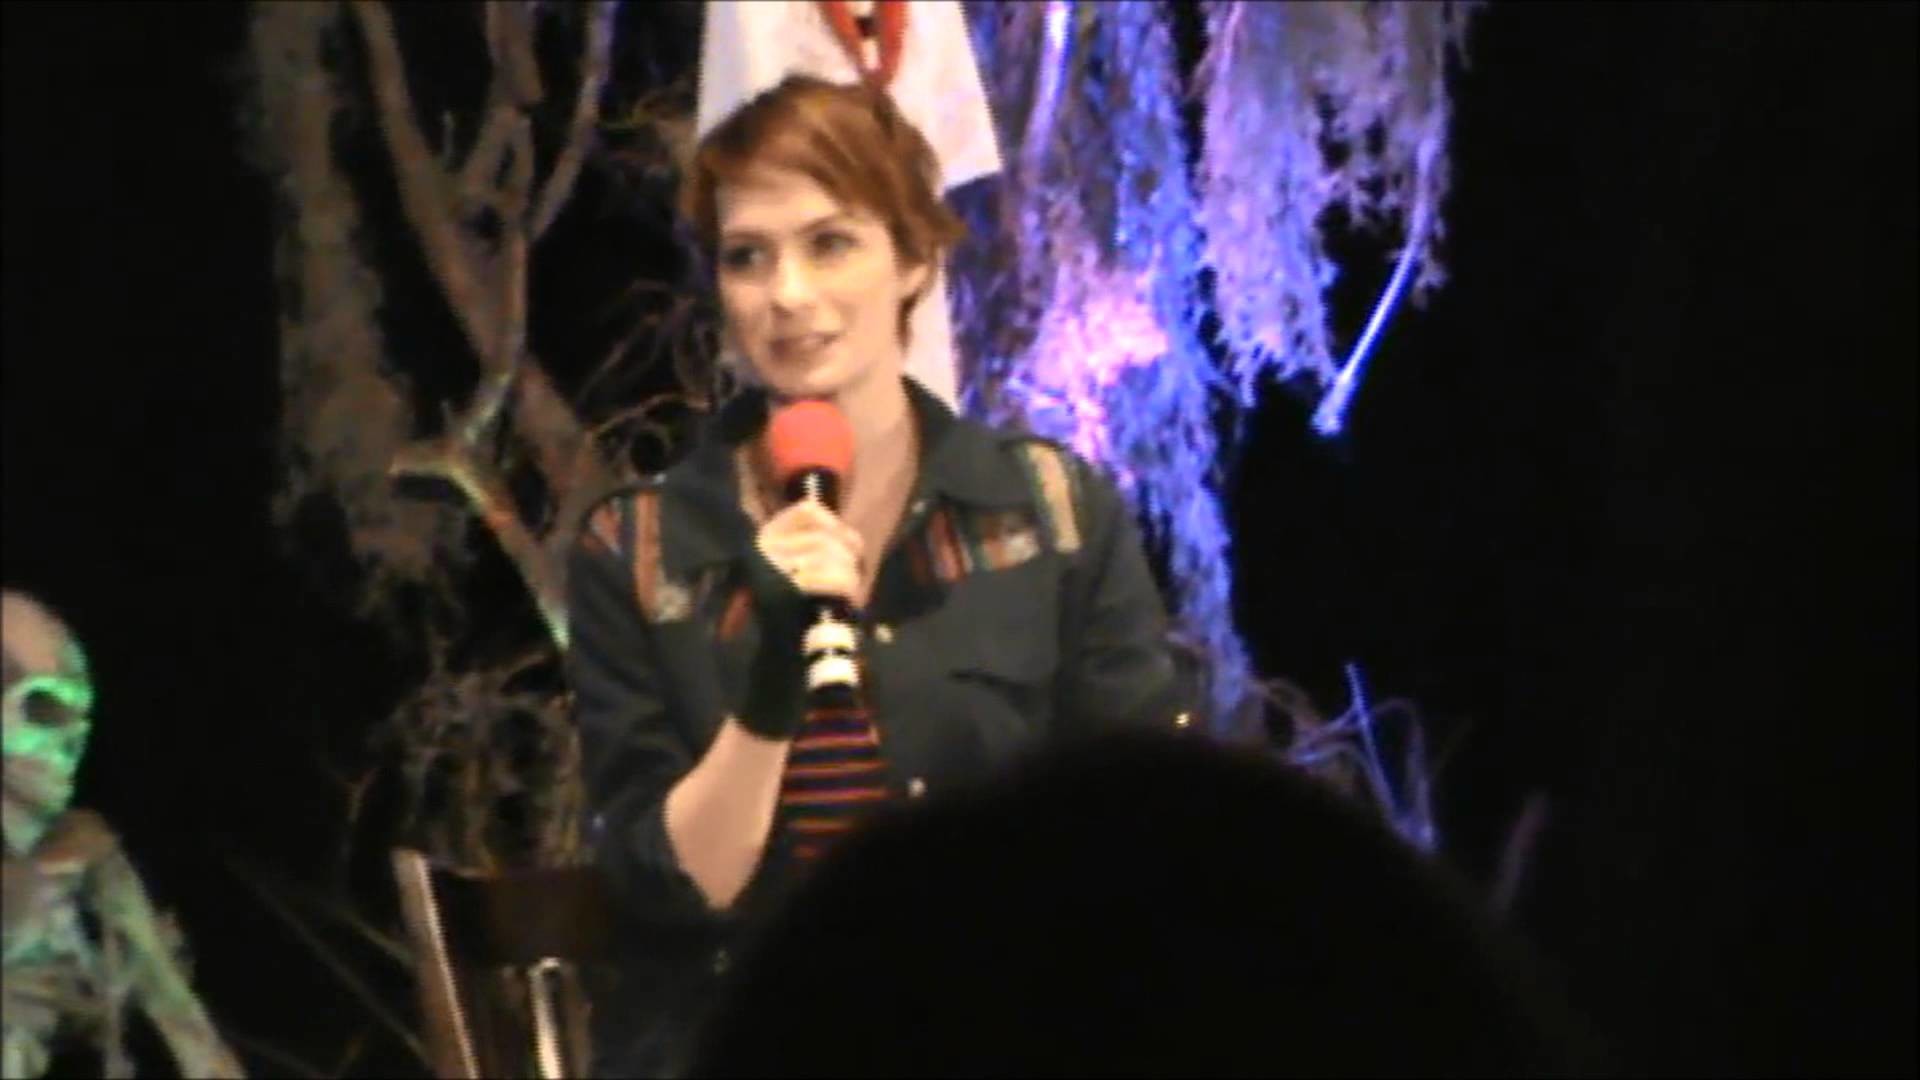 1920x1080 Felicia Day talks about Jared making fun of her on set - Burcon 2013